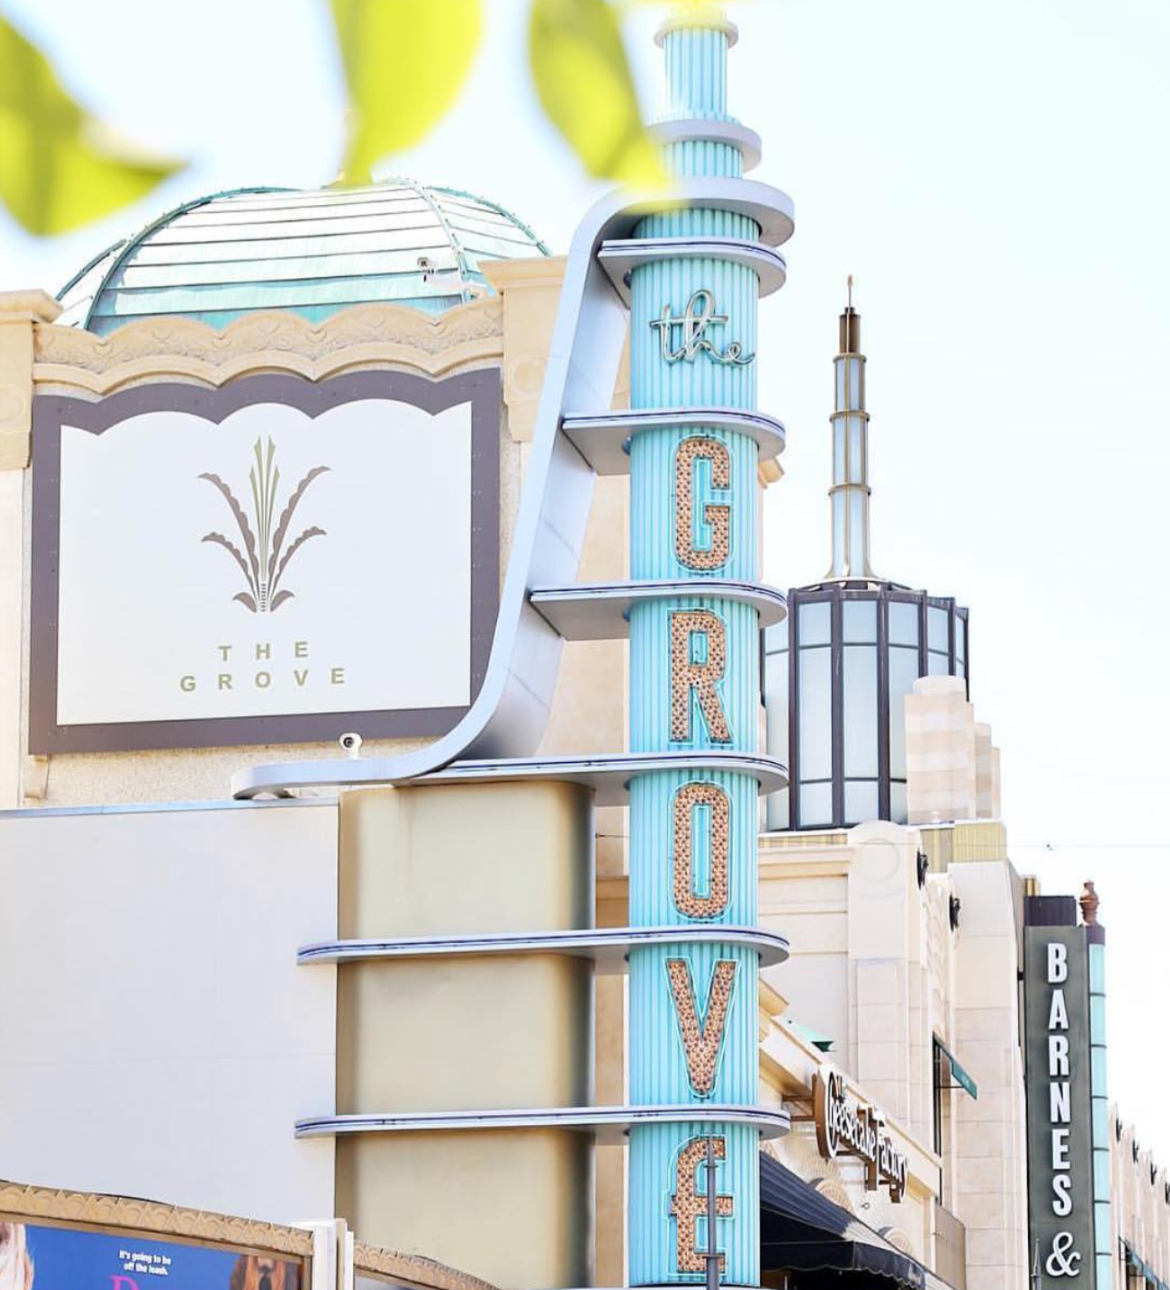 When you have a summer internship in Los Angeles, there are plenty of places to go shopping.